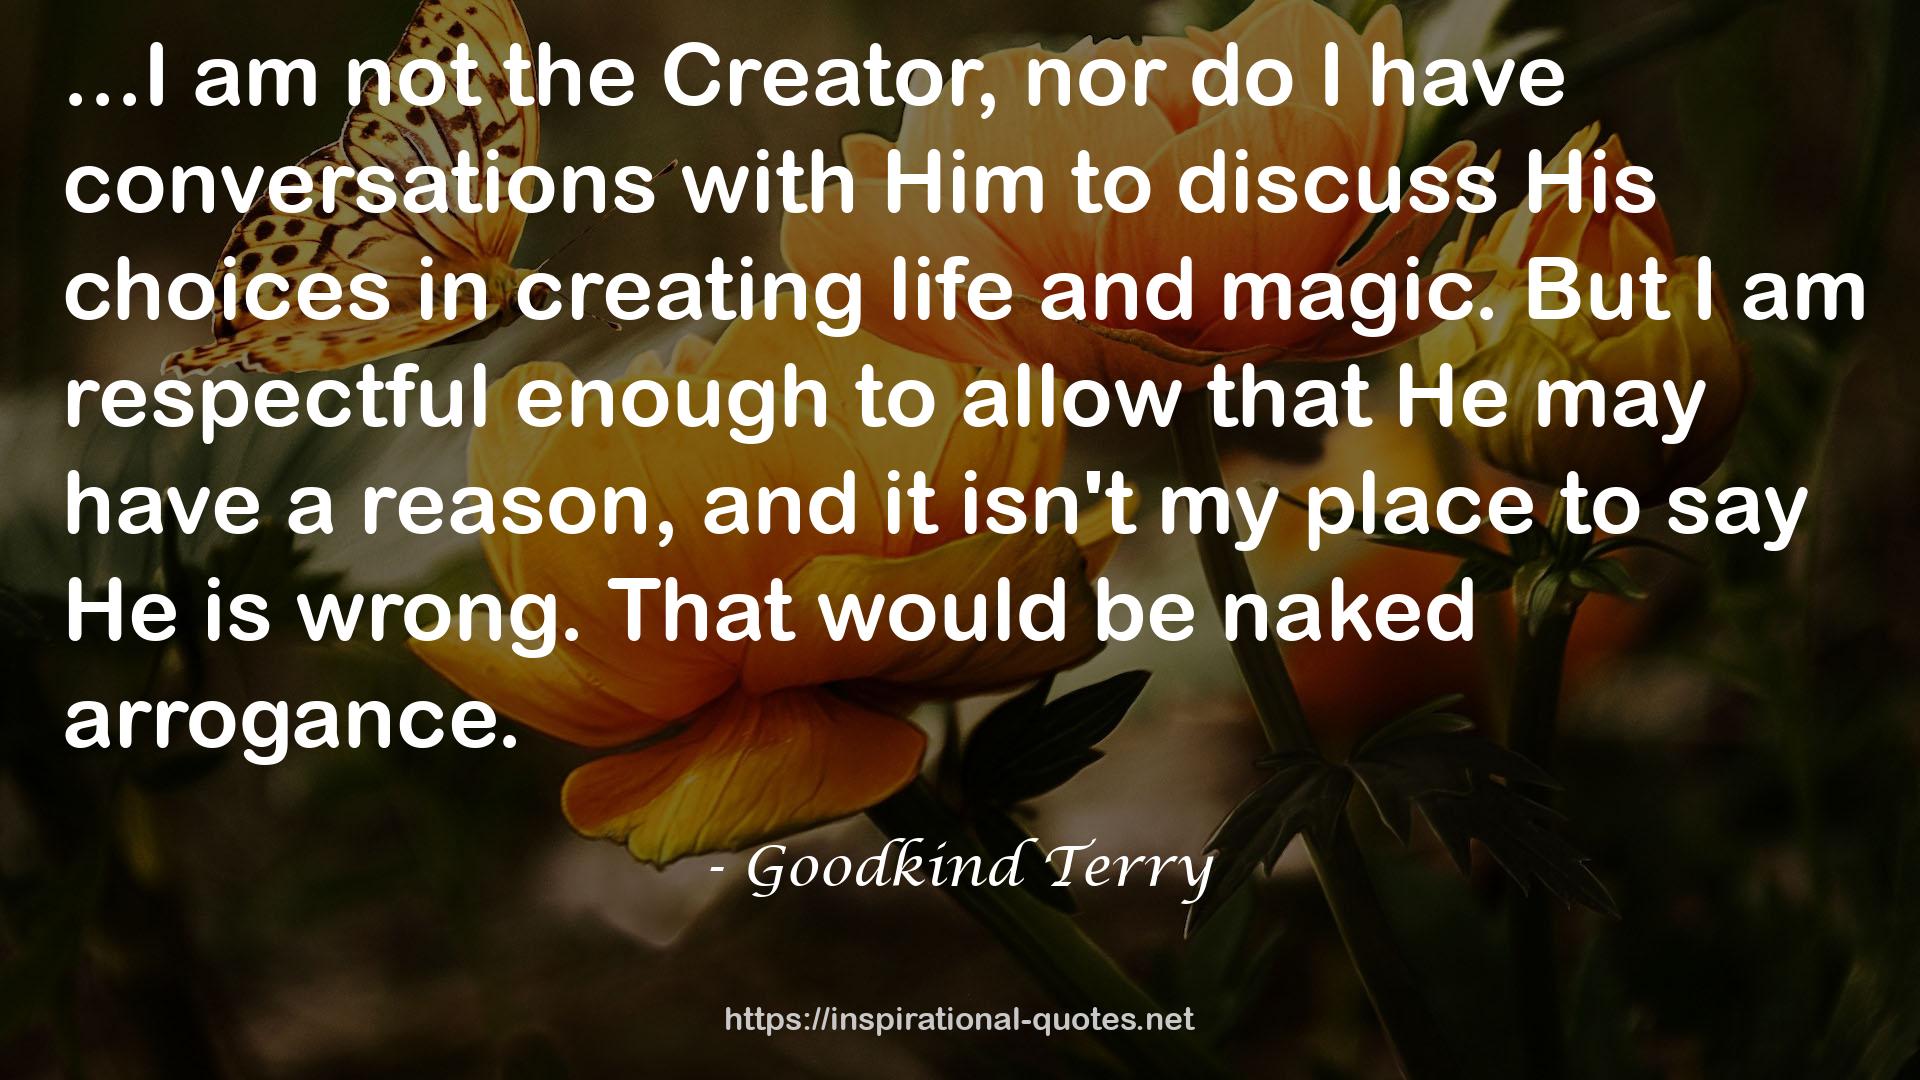 Goodkind Terry QUOTES